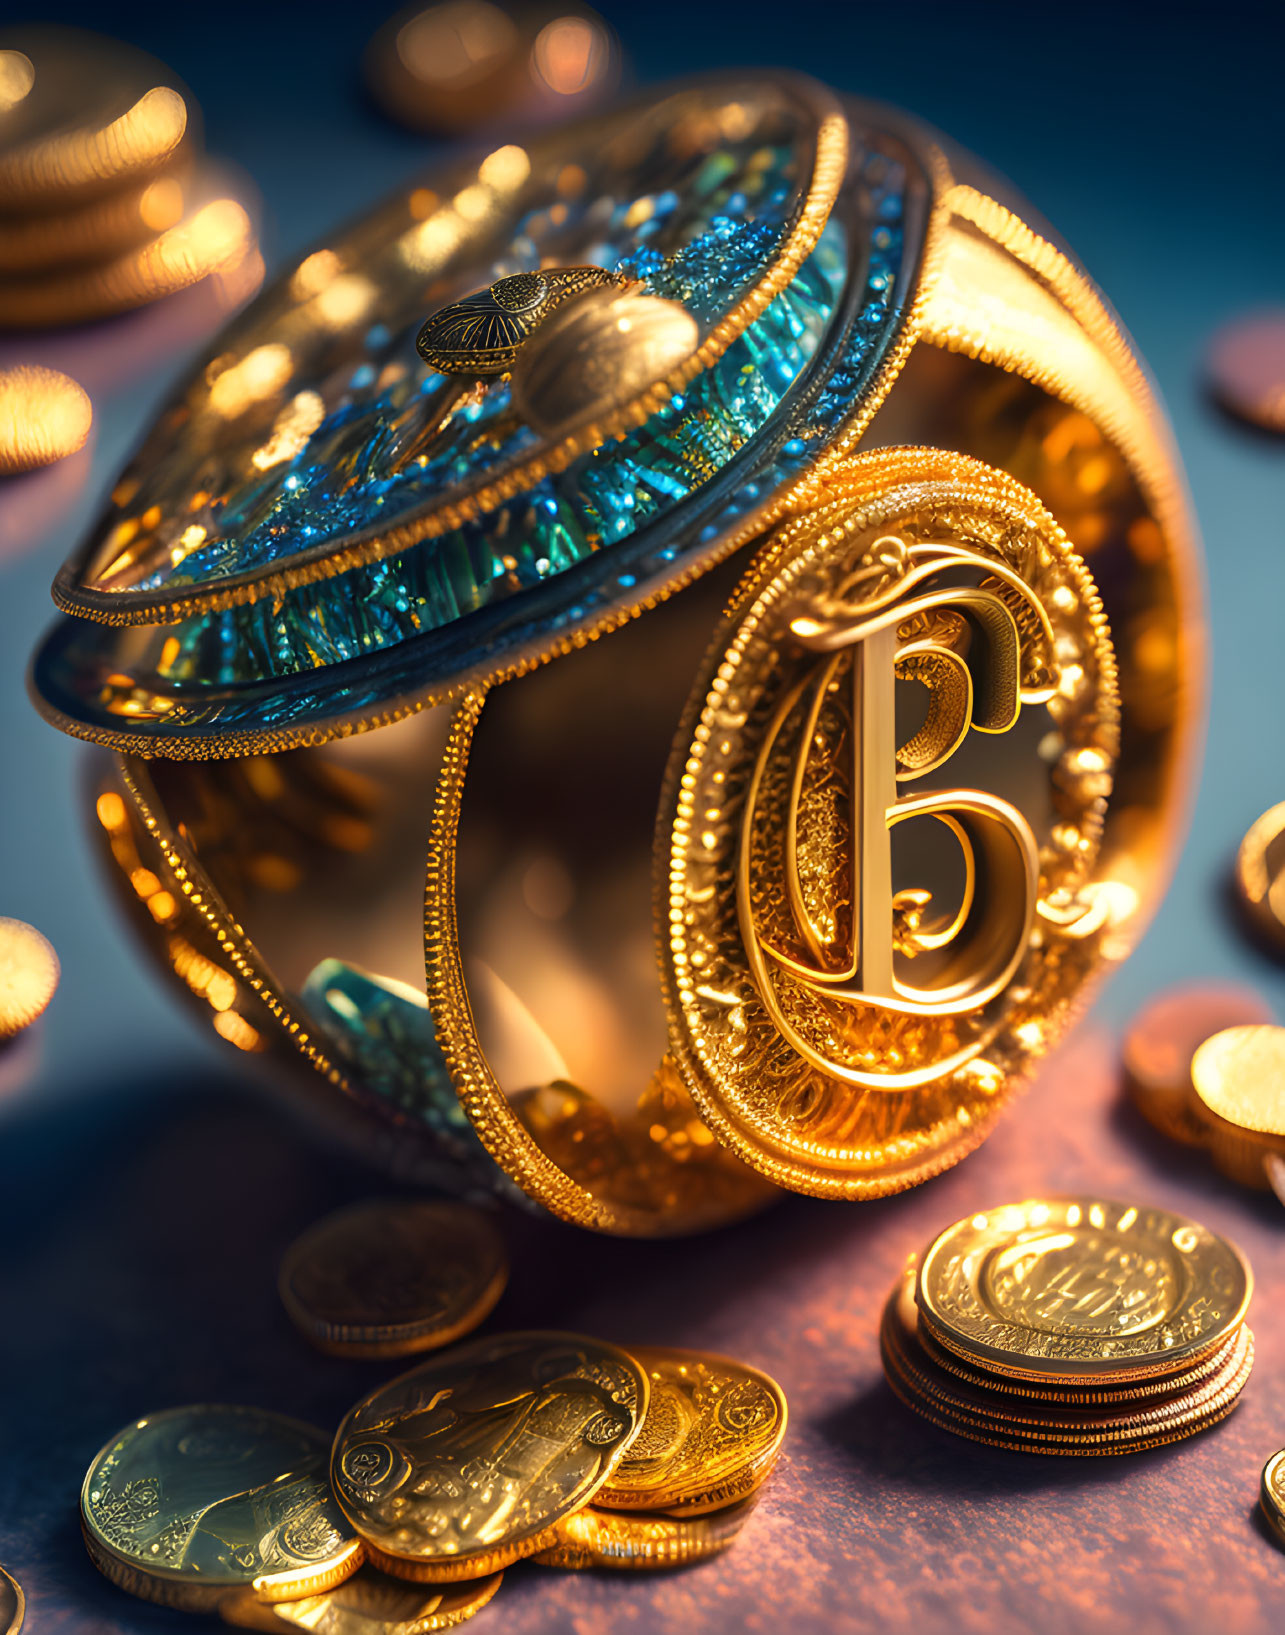 Golden 3D Rendered Cryptocurrency Coin with "B" Symbol and Scattered Coins